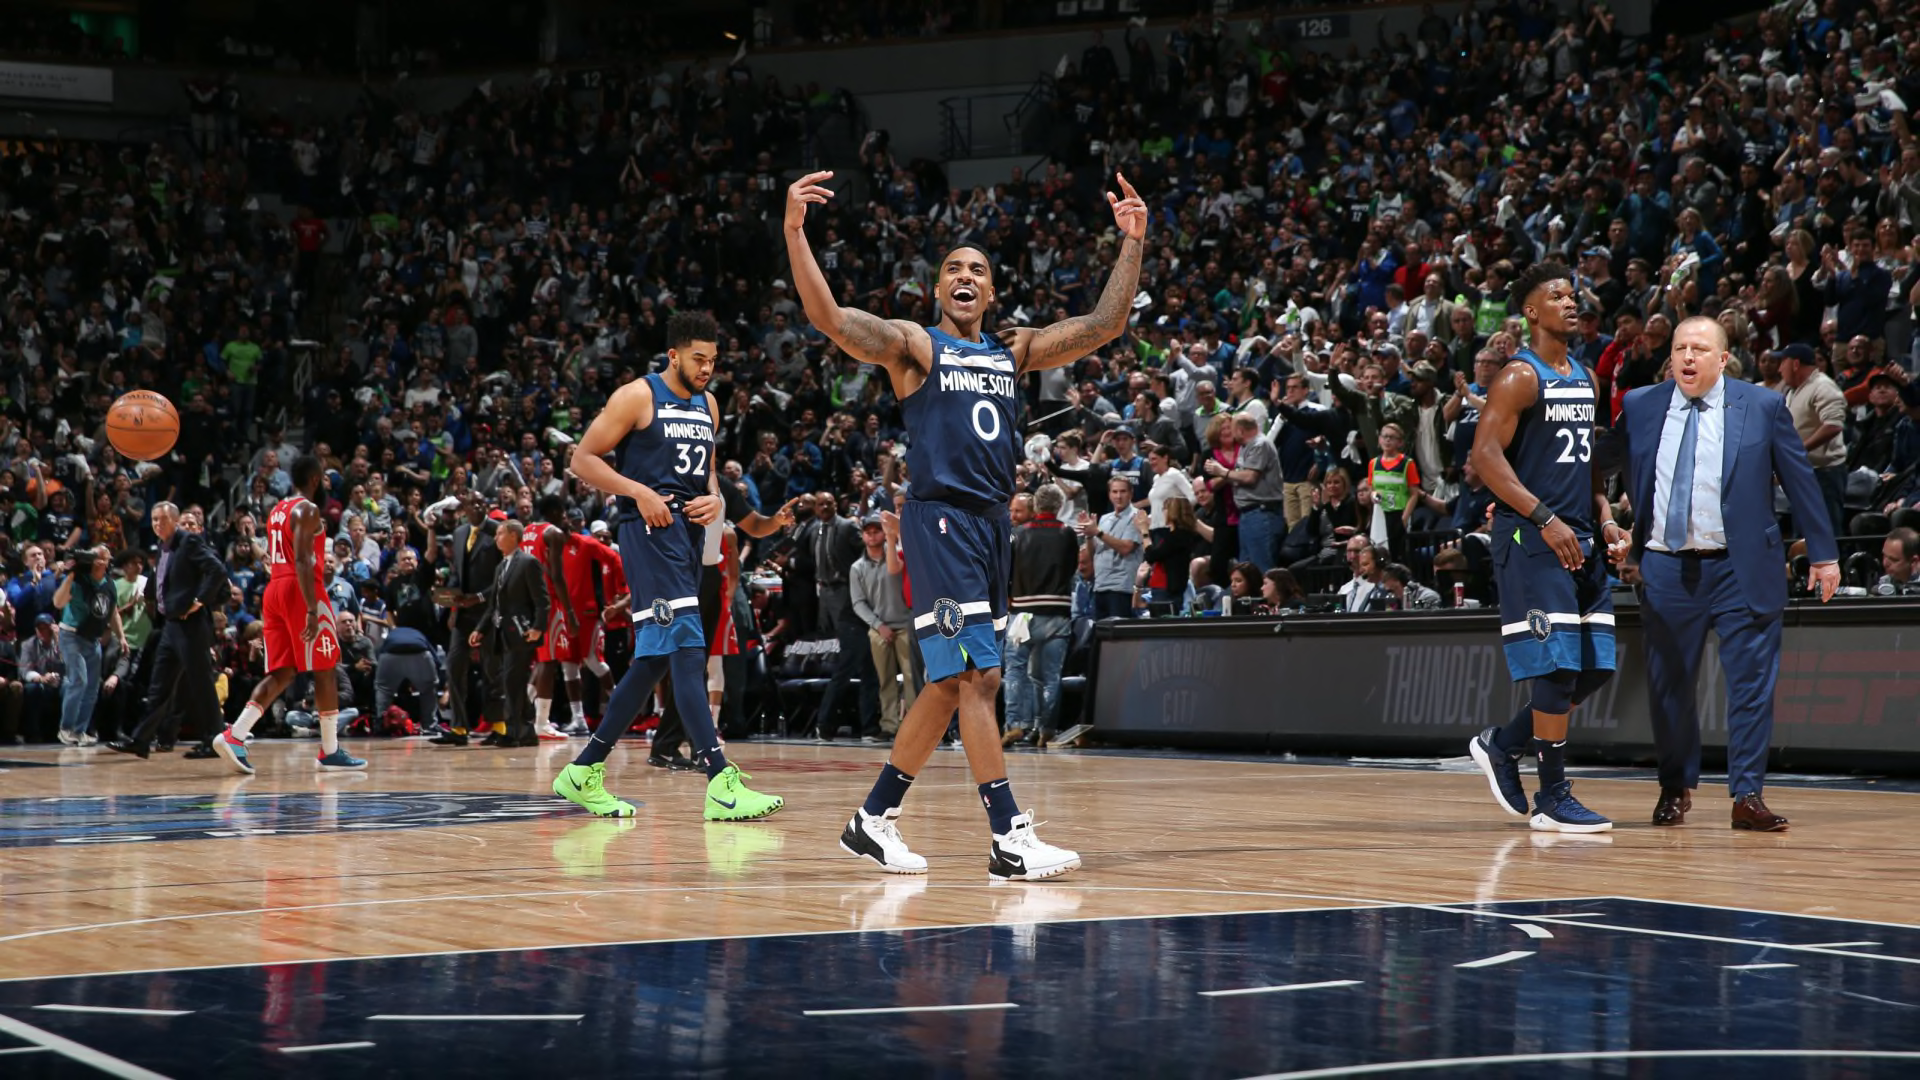 Top 5 Minnesota Timberwolves games from the 2017-18 season